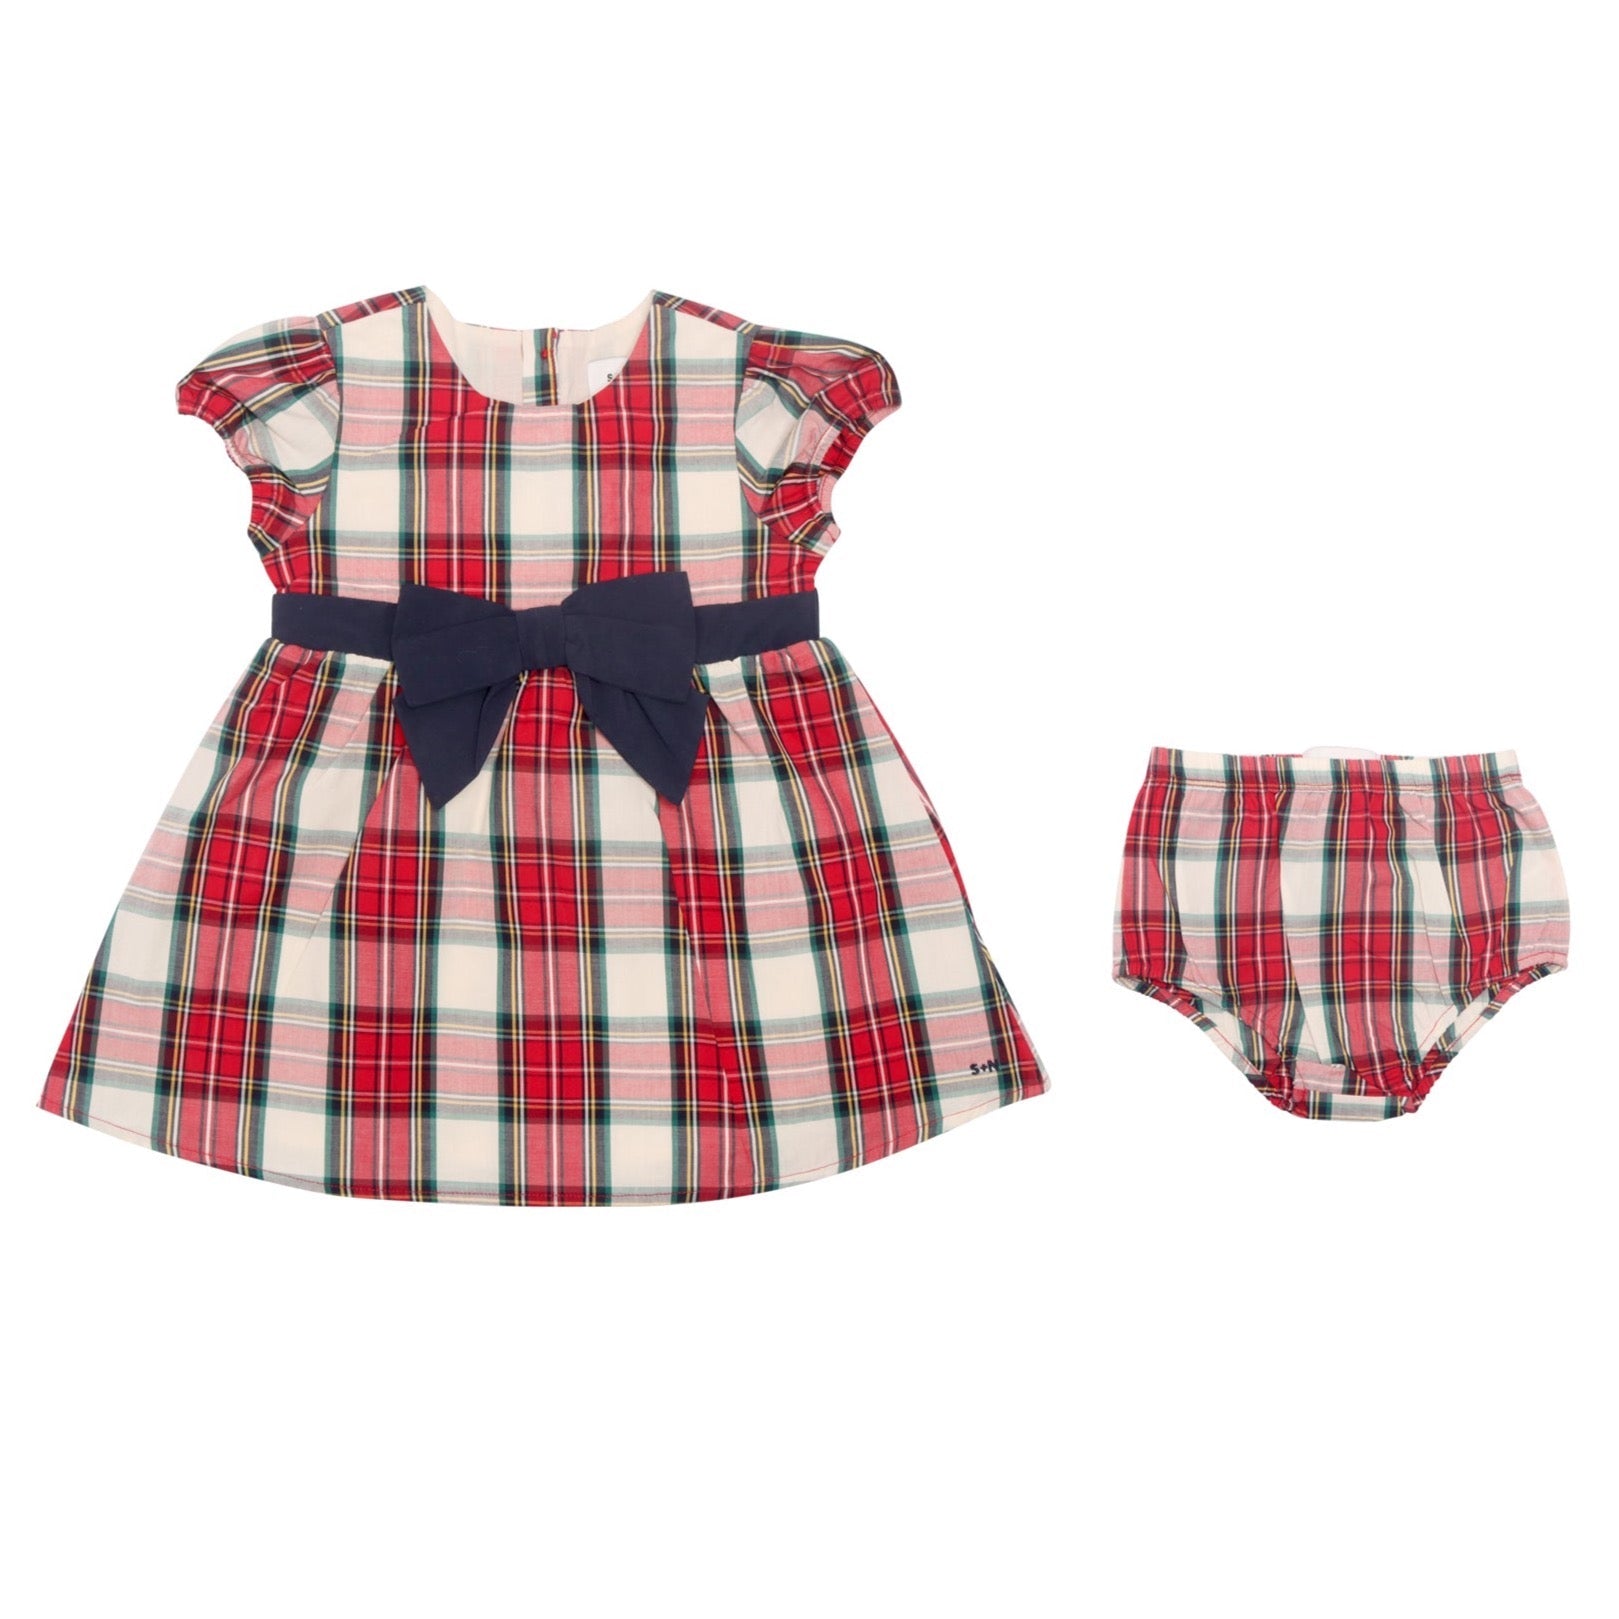 Evelyn Dress in Holiday Red Tartan